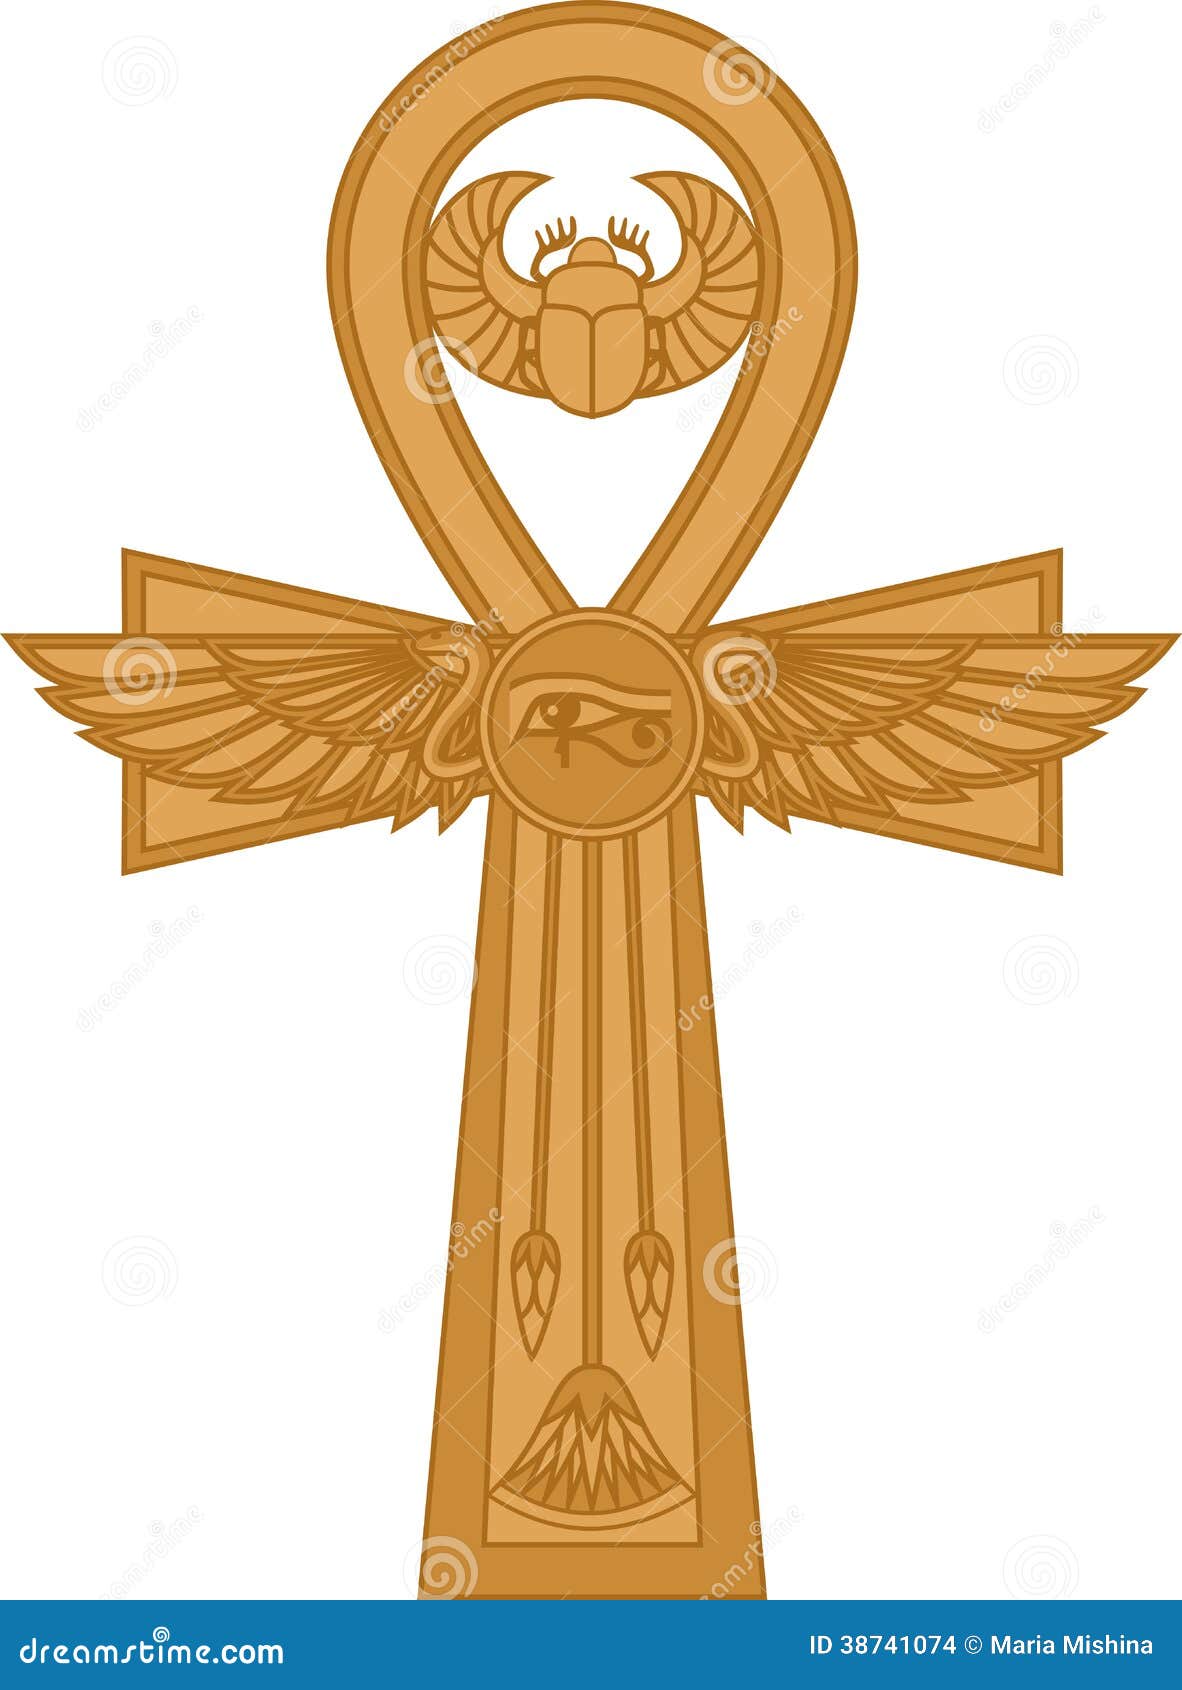 The Ankh: Meaning and Symbolism of the Ancient Egyptian Symbol